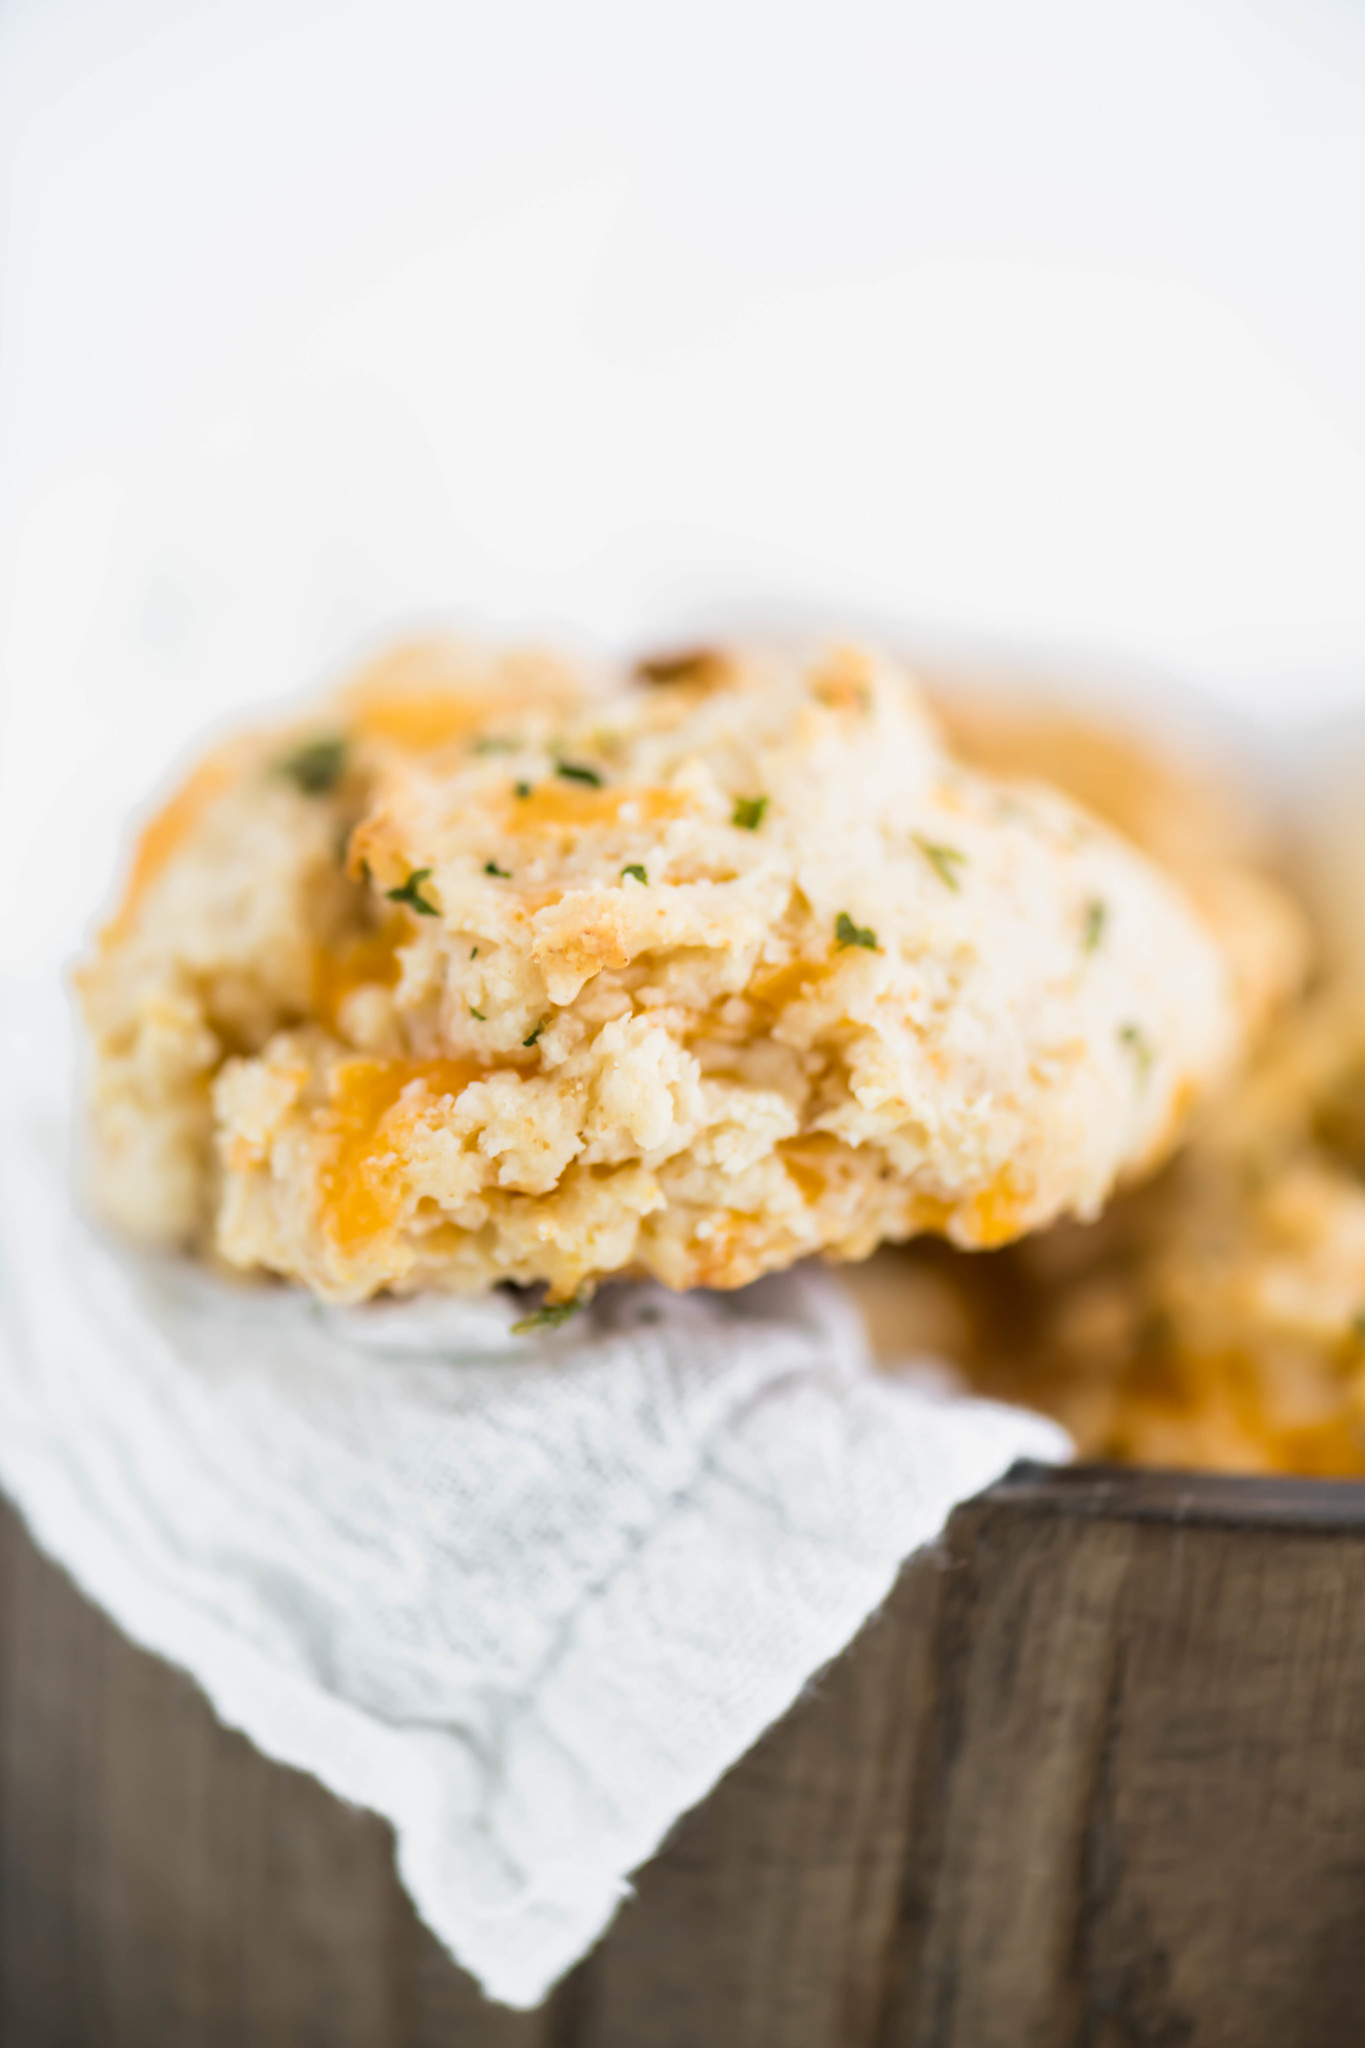 Ever want to make Red Lobster Cheddar Bay Biscuits at home? Now you can with this simple recipes and just a handful of ingredients. Taste just like the real deal. If you love copycat recipes, you'll love this cheddar bay biscuit recipe.